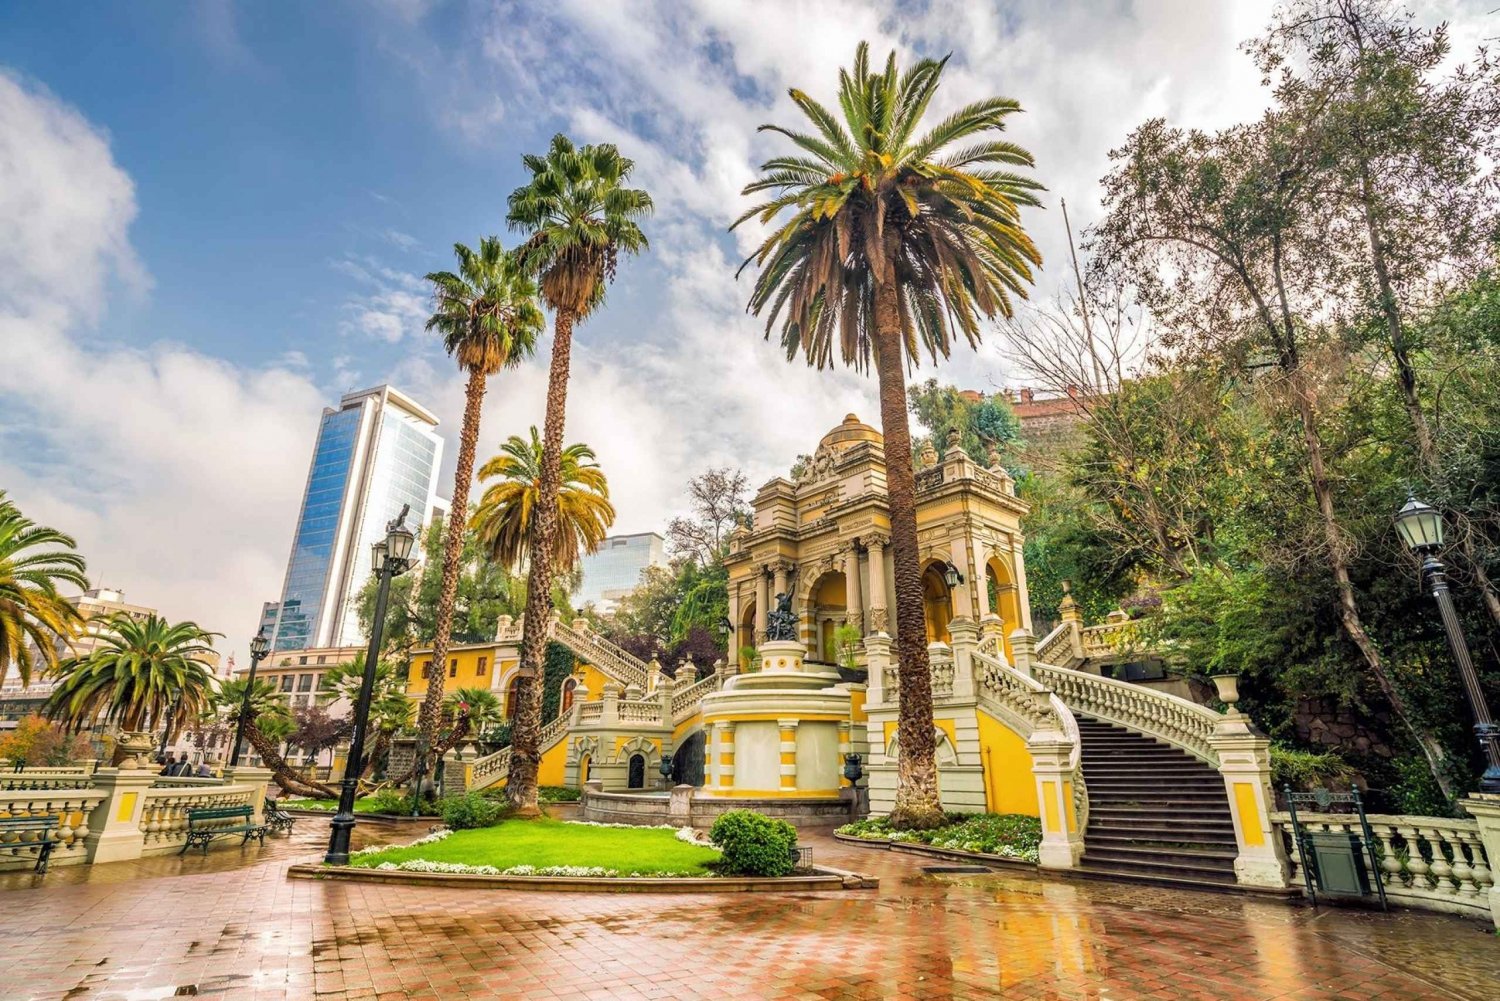 Discover Santiago, where modernity merges with history